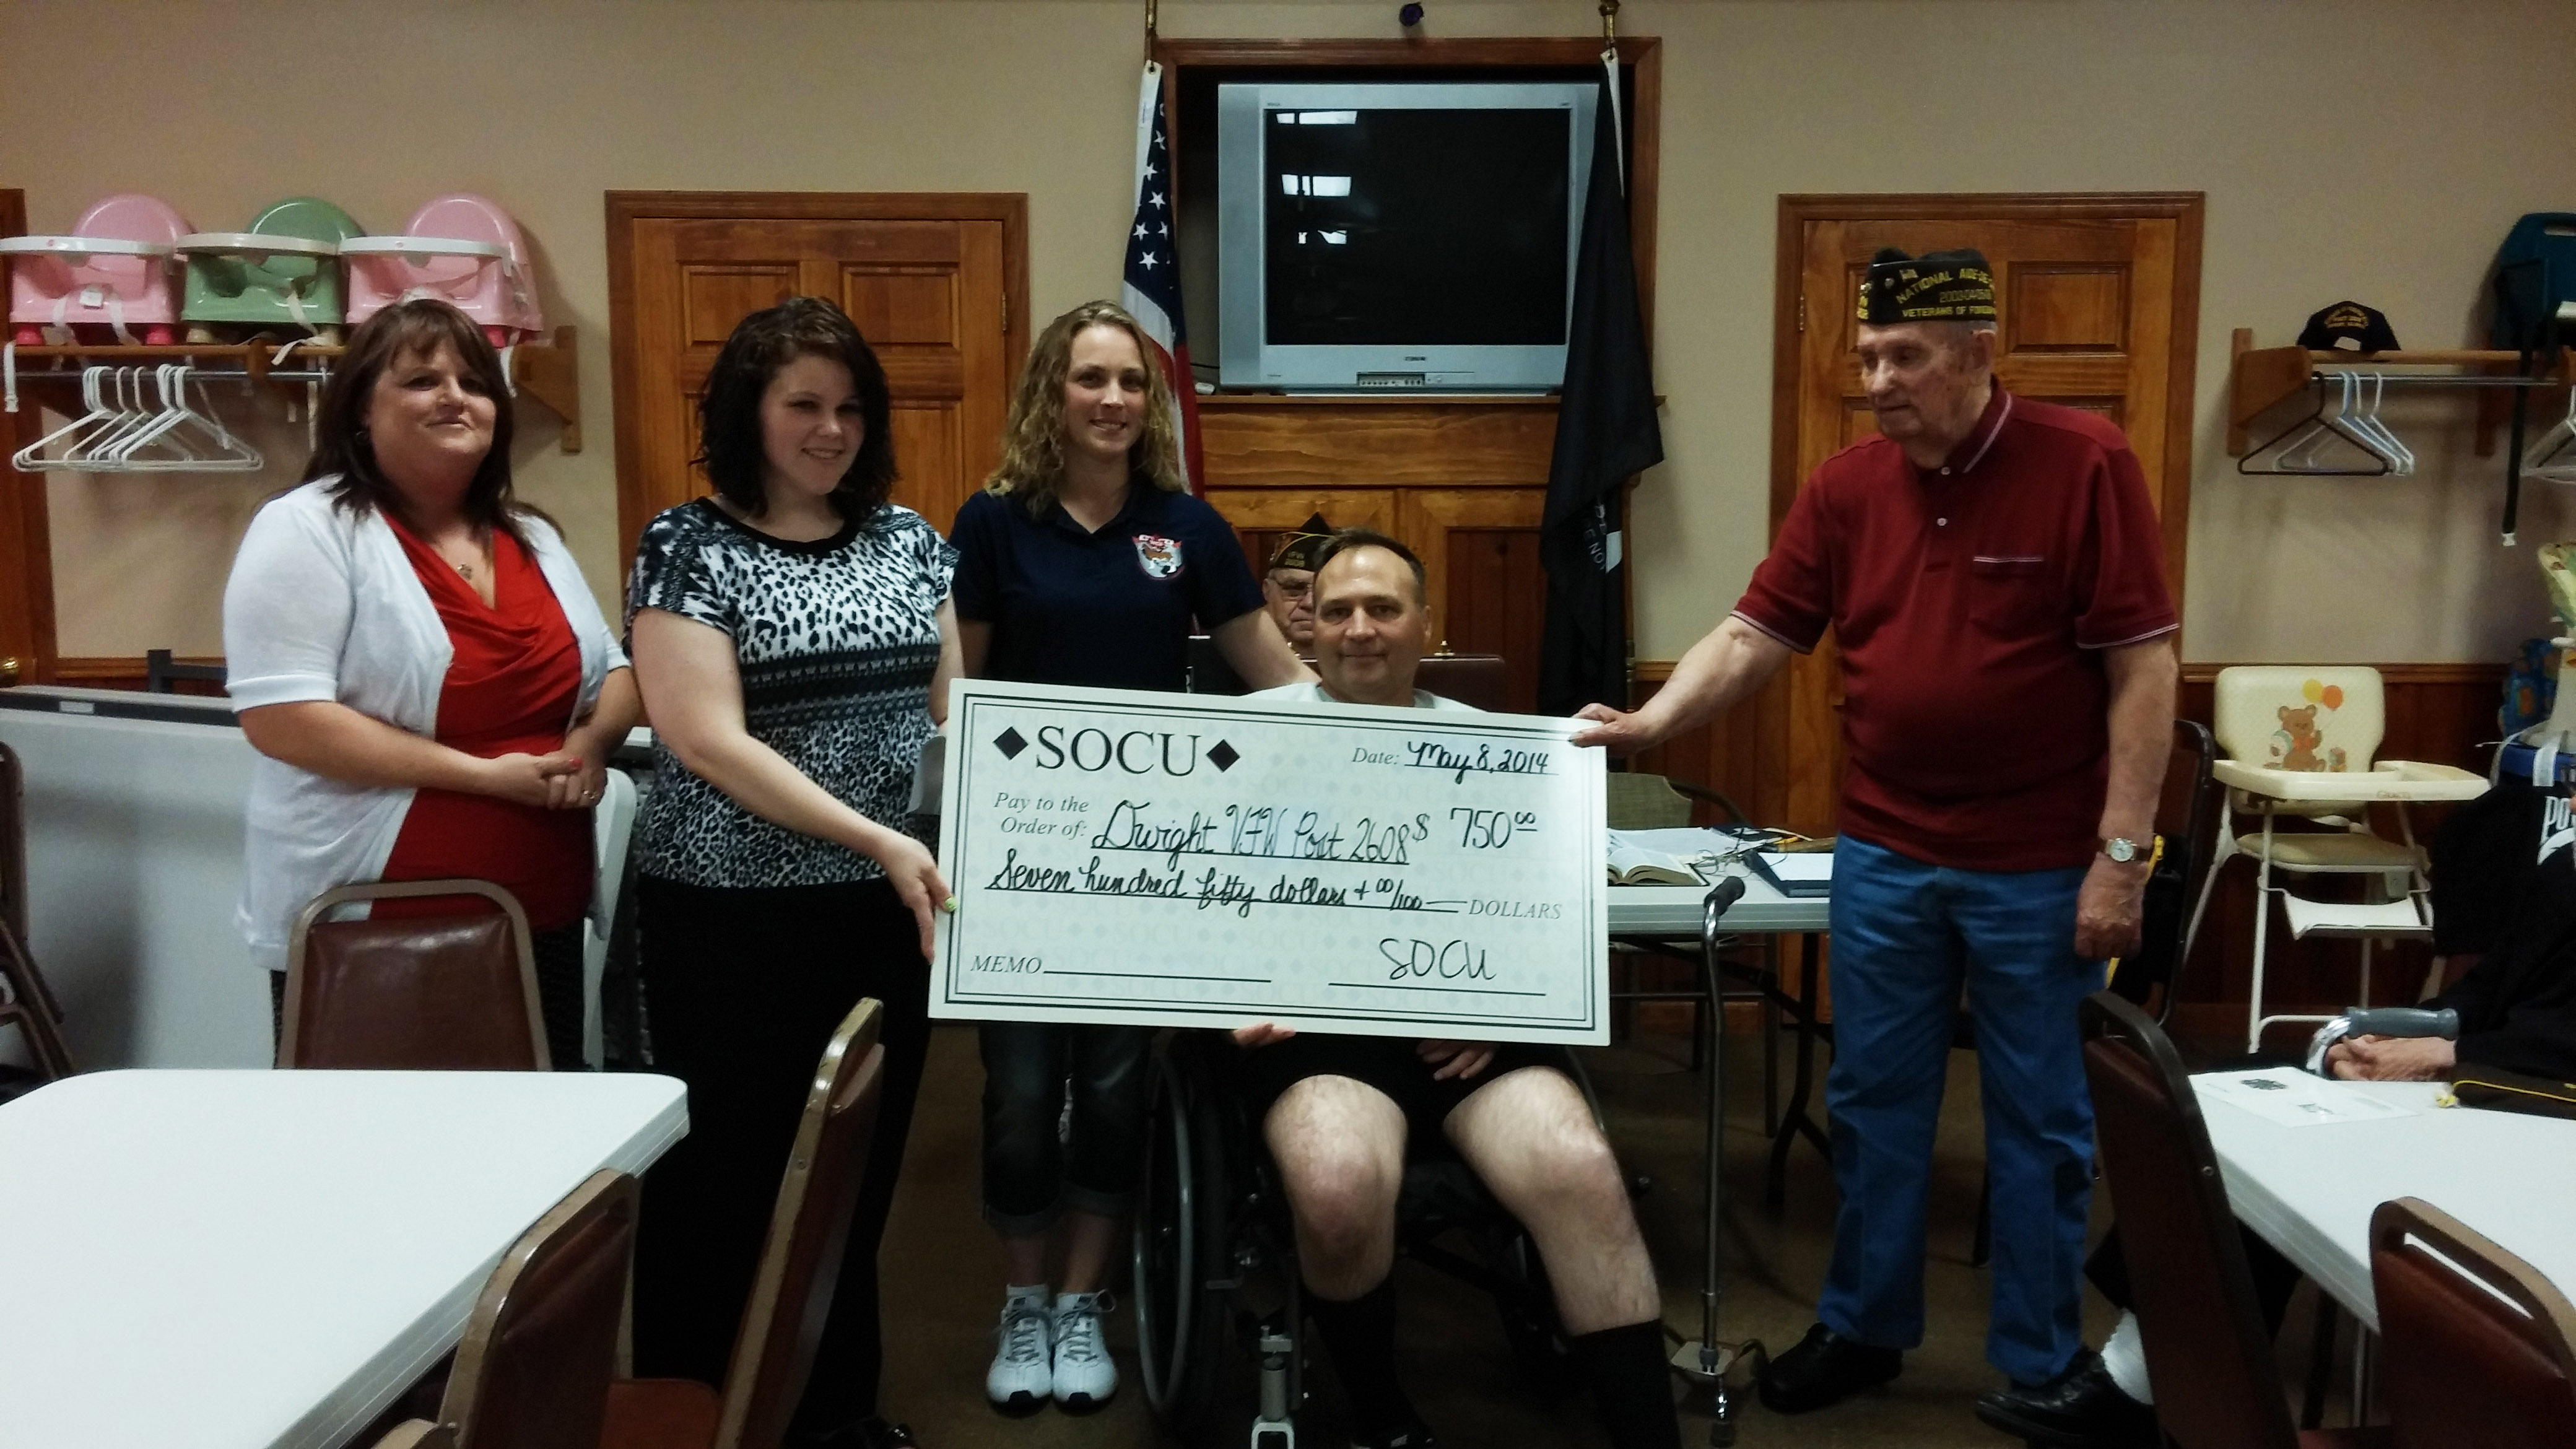 Presenting check to VFW